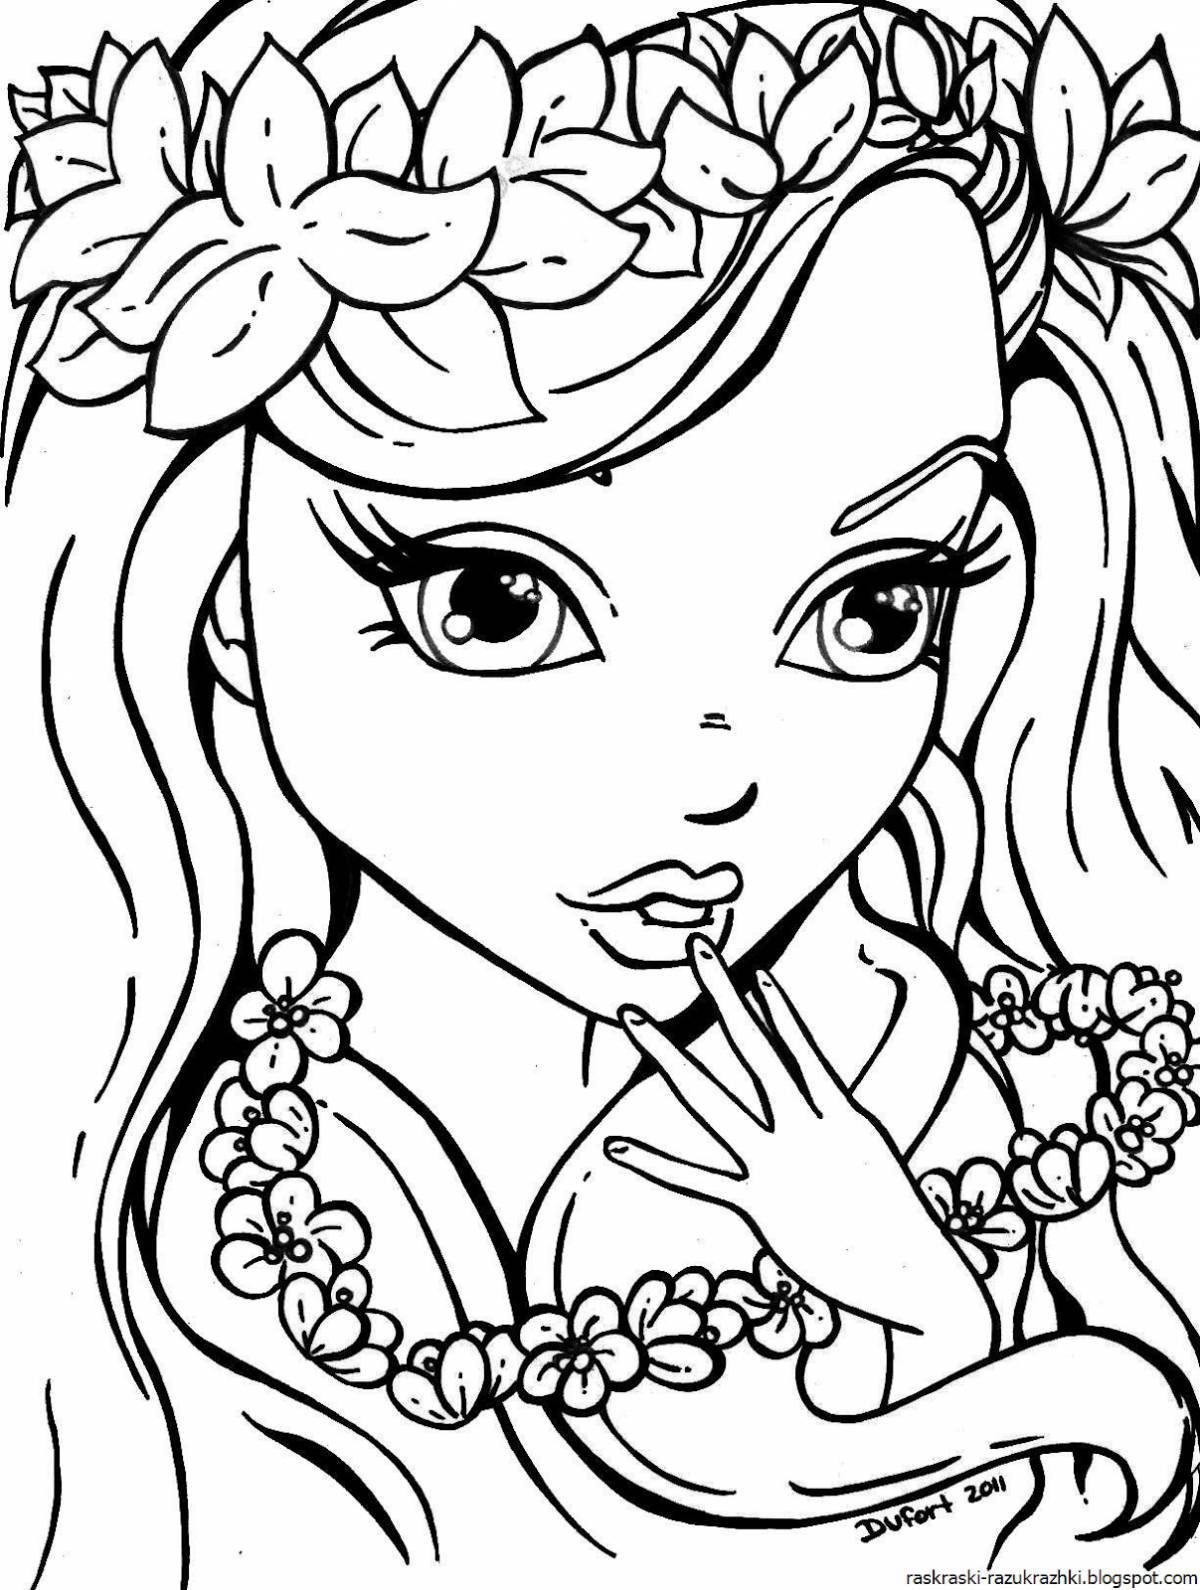 Color Explosion 10 Years Coloring Page